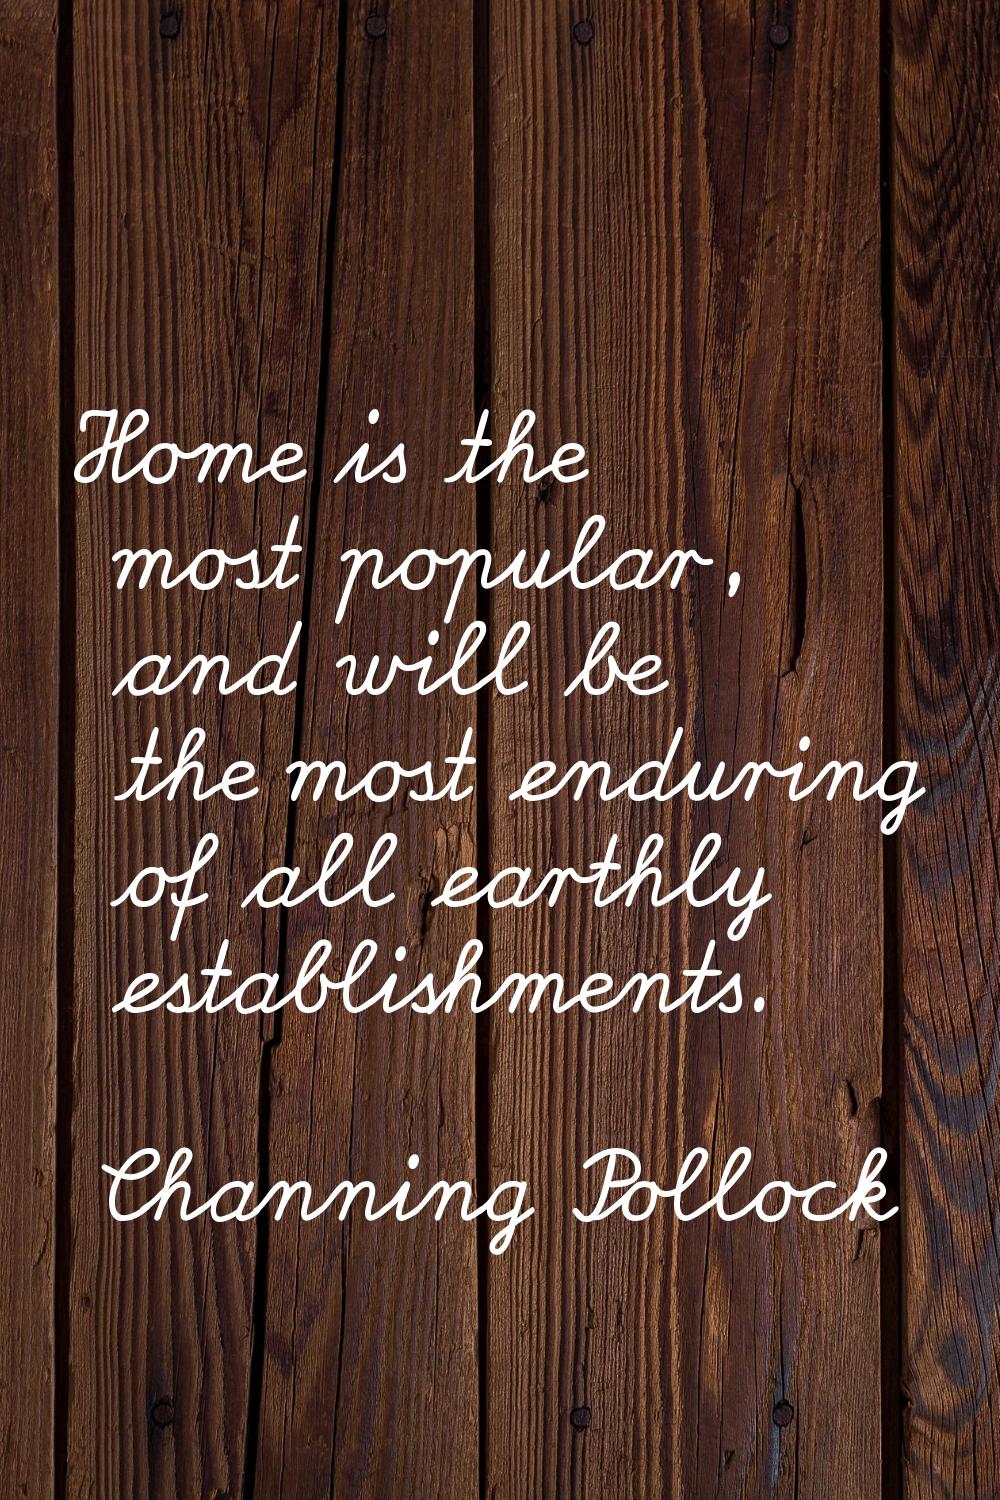 Home is the most popular, and will be the most enduring of all earthly establishments.